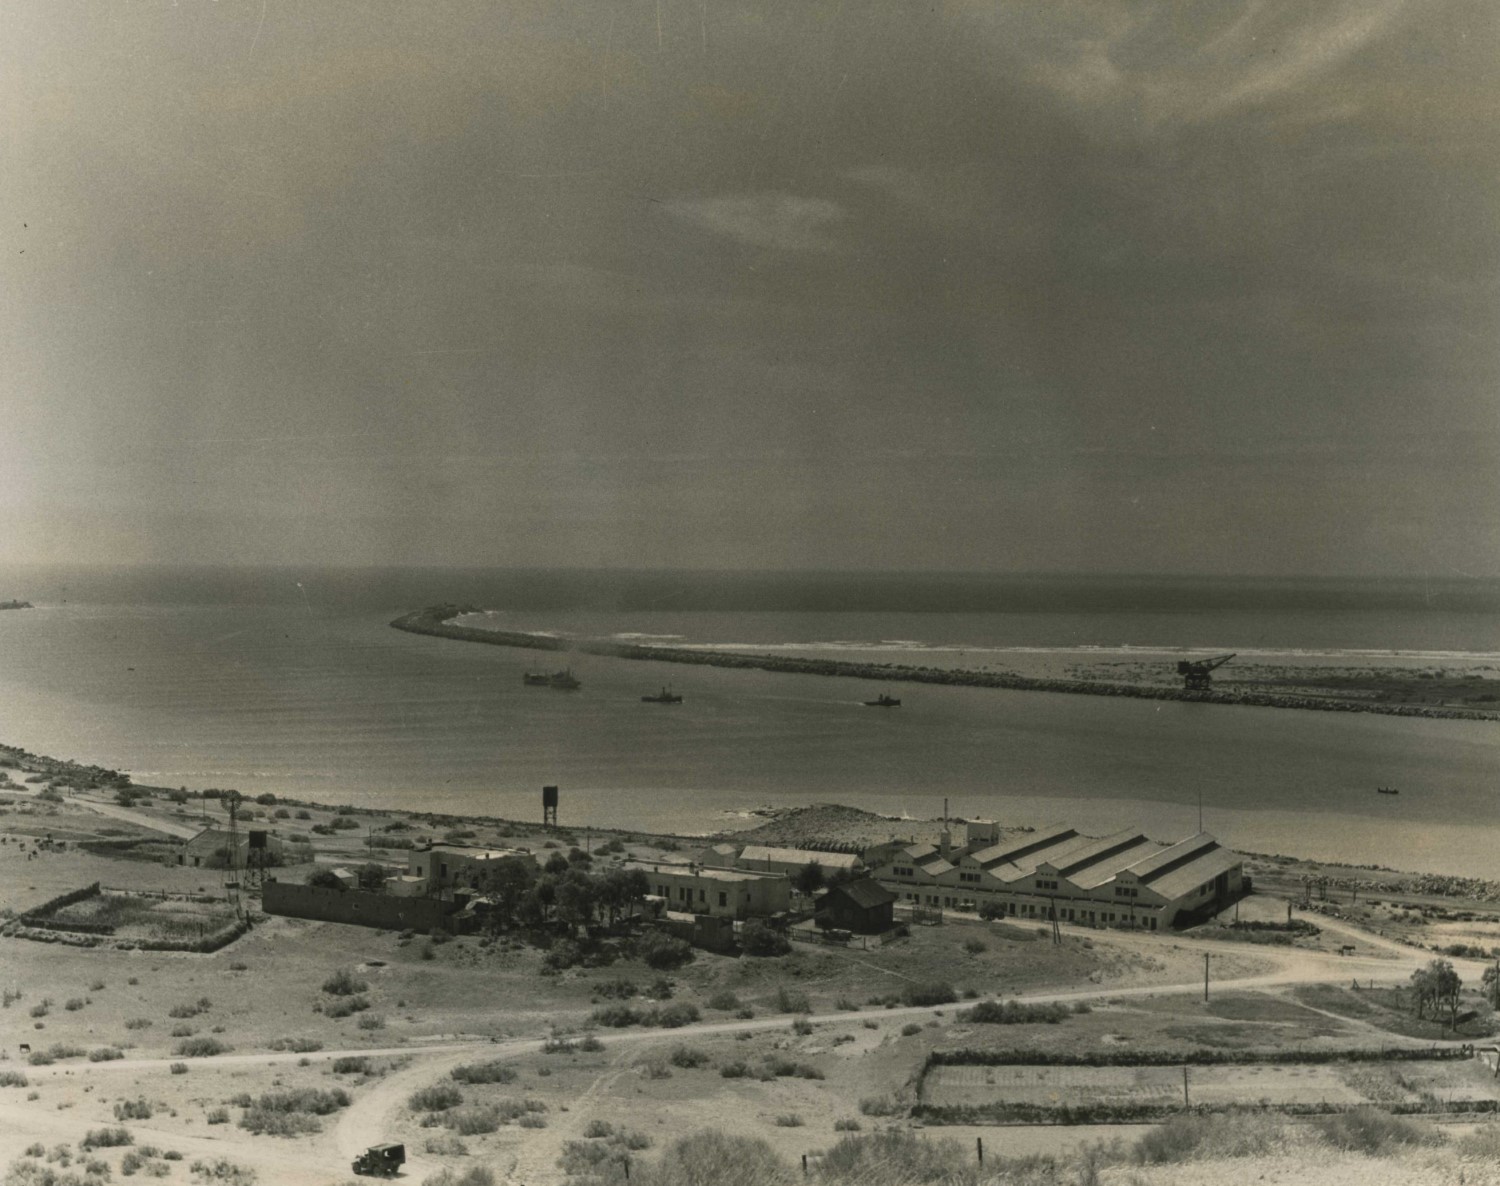  Mehdia - General view of where US troops attacked Mehdia Plage, near Port Lyautey on November 8, 1942